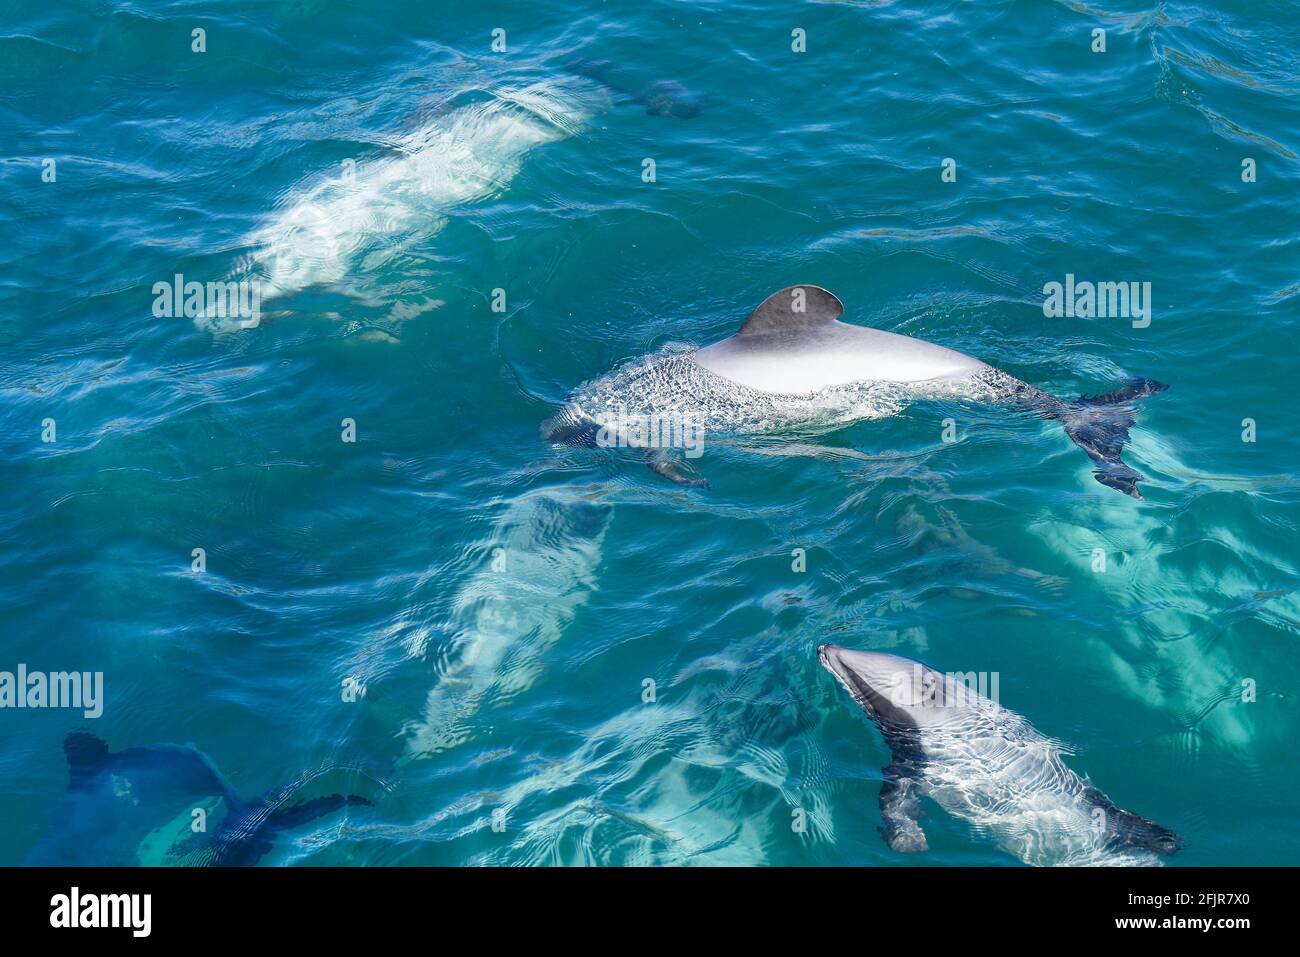 A pod of Hectors dolphins, endangered dolphin, New Zealand. Cetacean endemic to New Zealand. Stock Photo